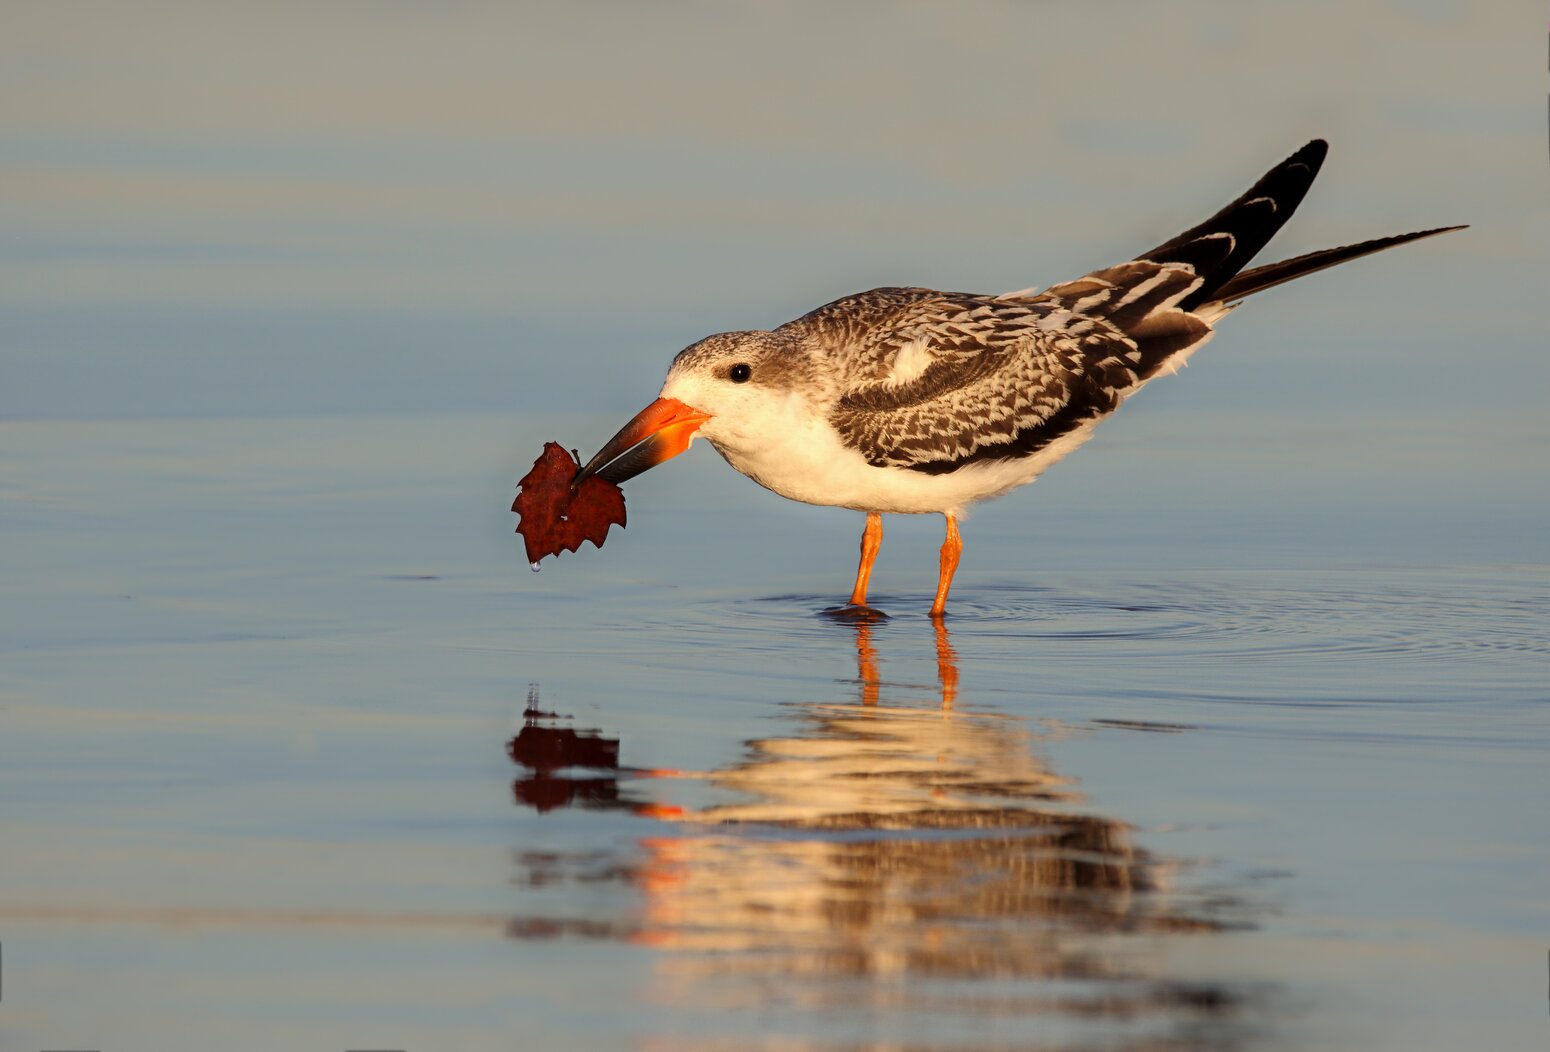 A young Black Skimmer at Midland Beach experiments with a strange object. Photo: Isaac Grant